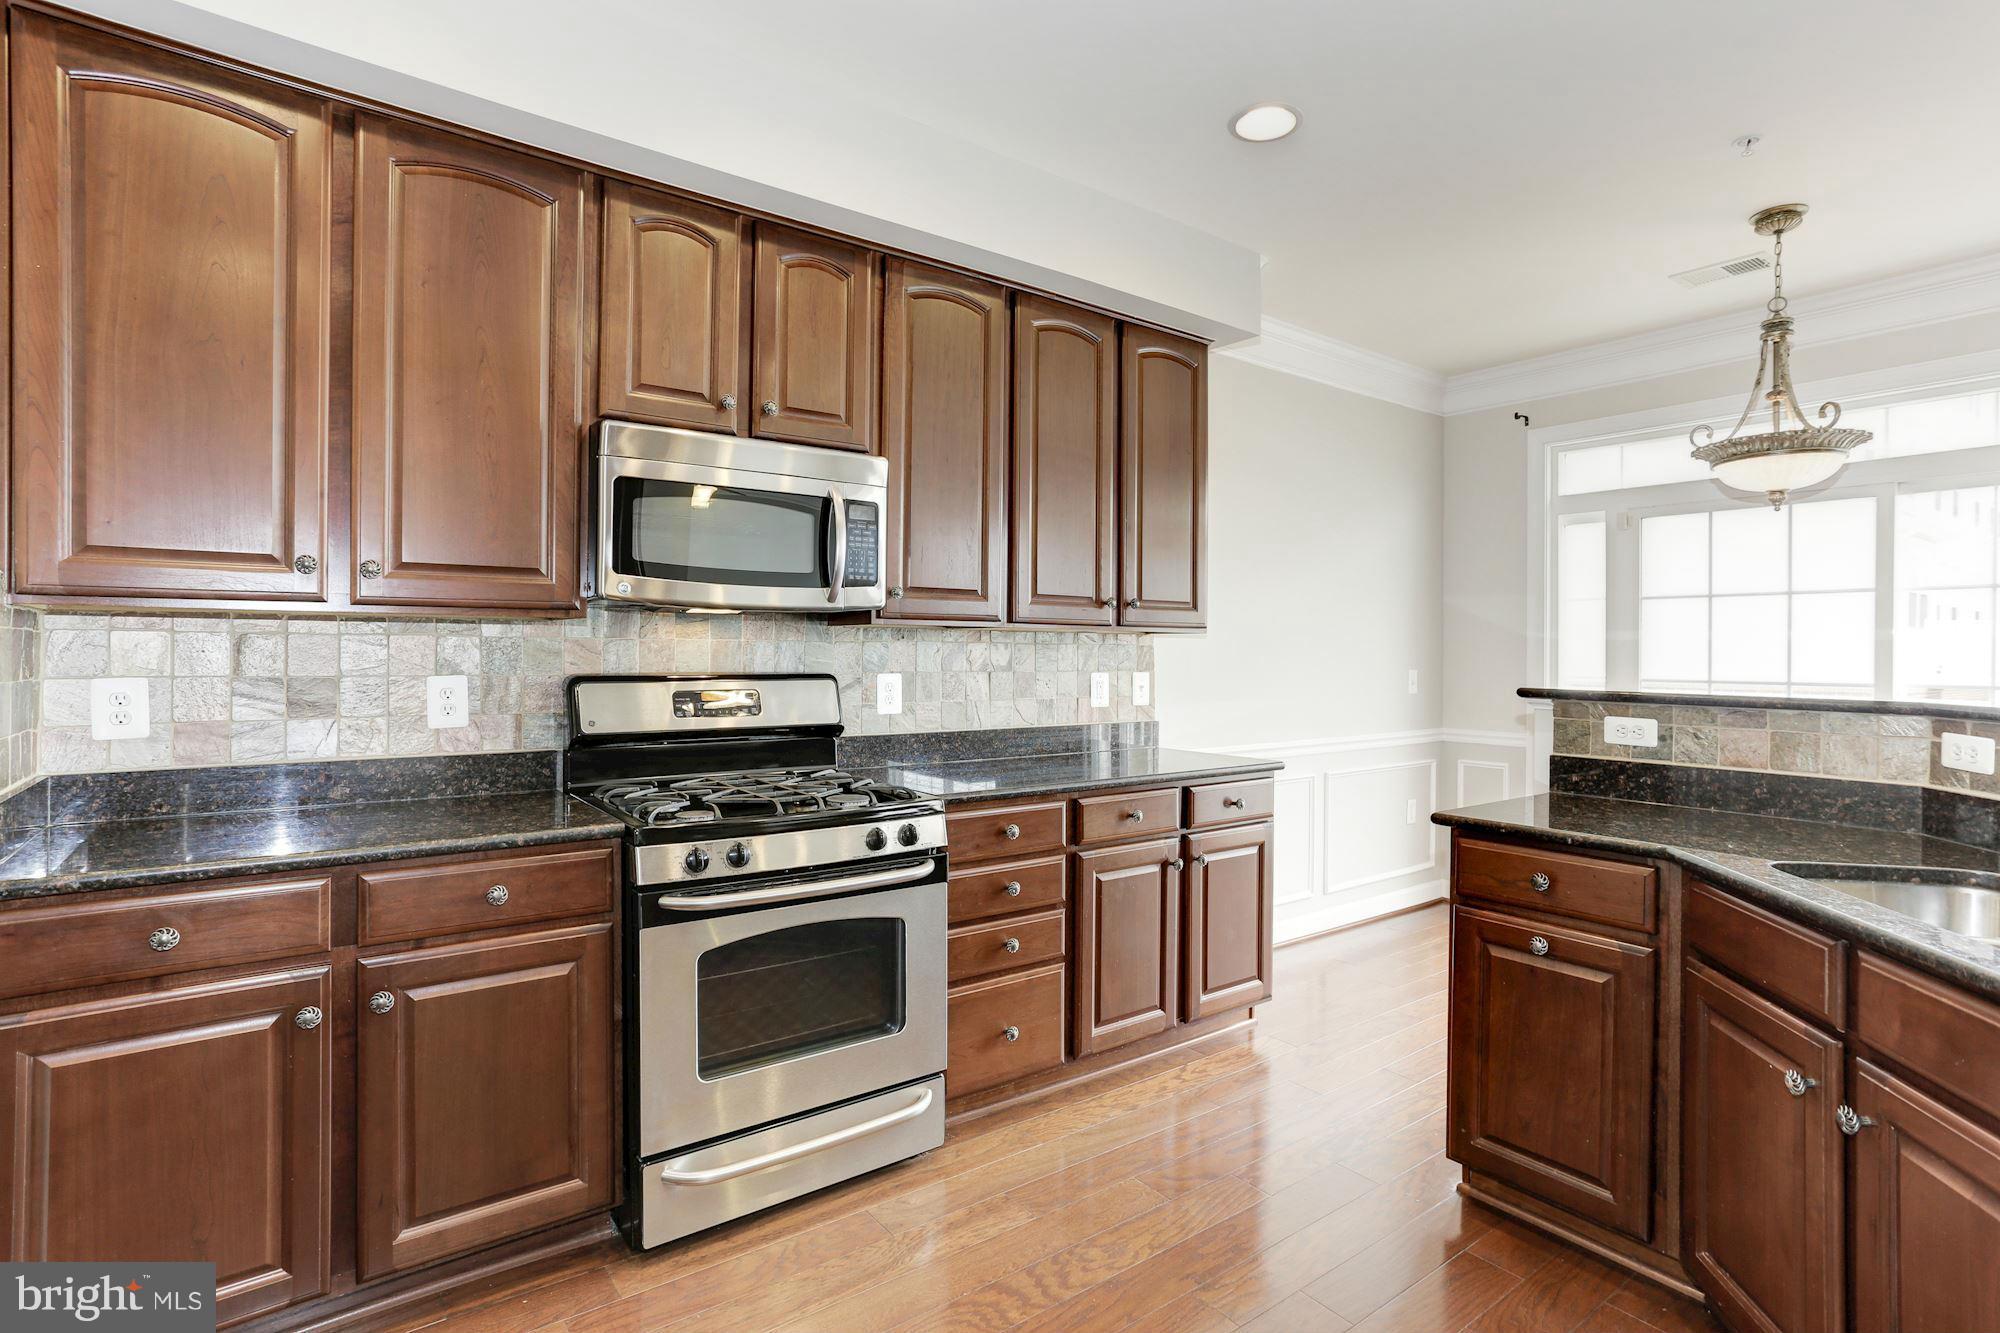 a kitchen with granite countertop wooden cabinets and a stove top oven